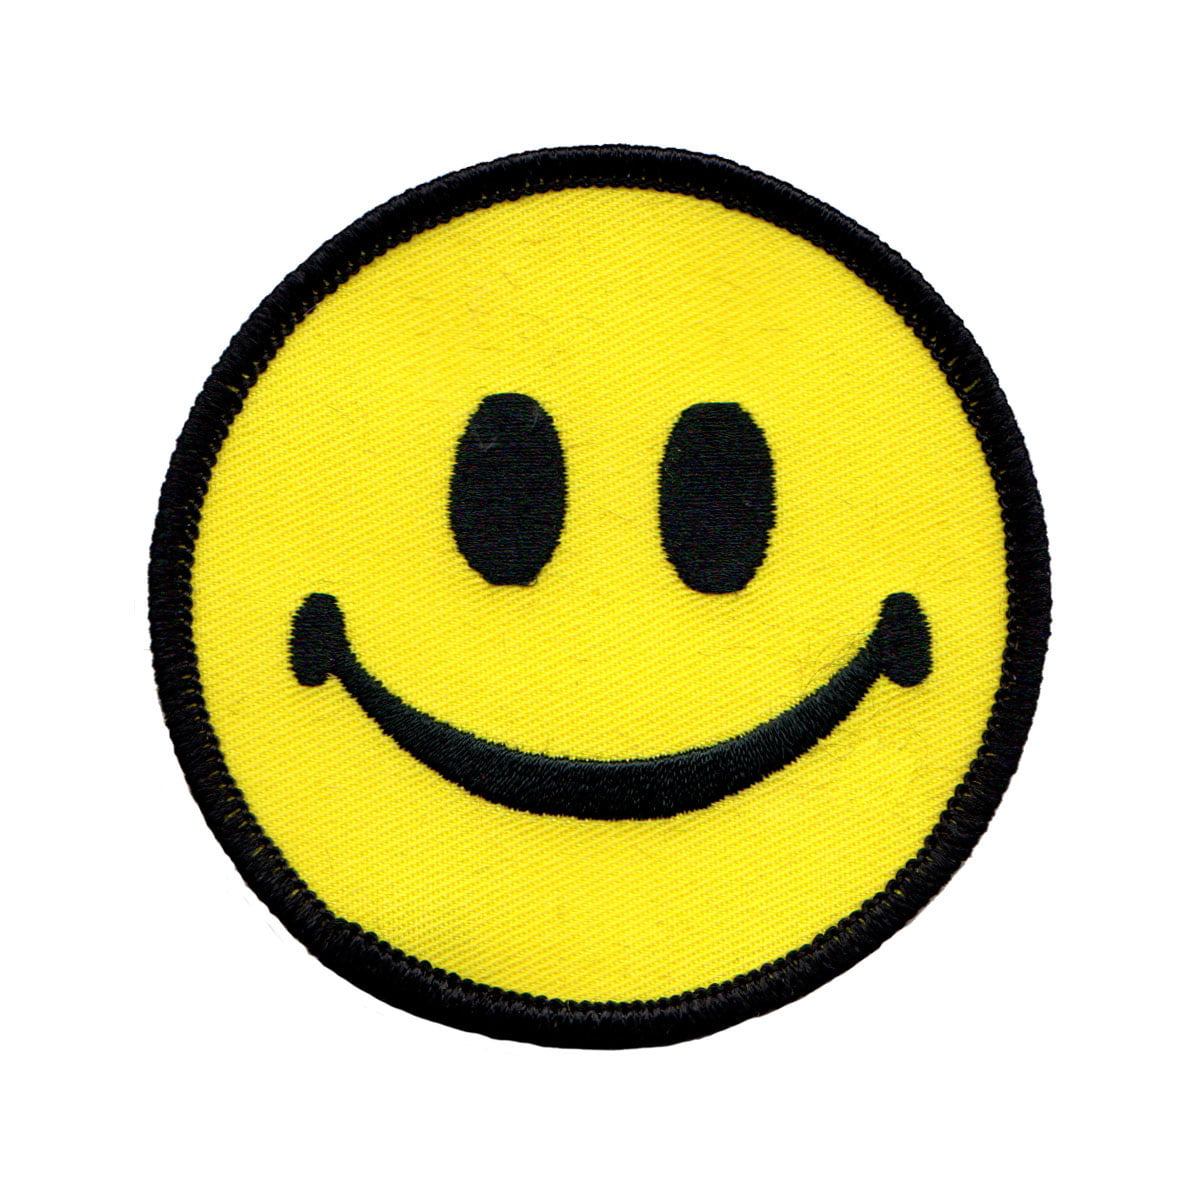 Smiley Face Yellow Smile Patch Embroidered Iron or Sew On Halloween Costume